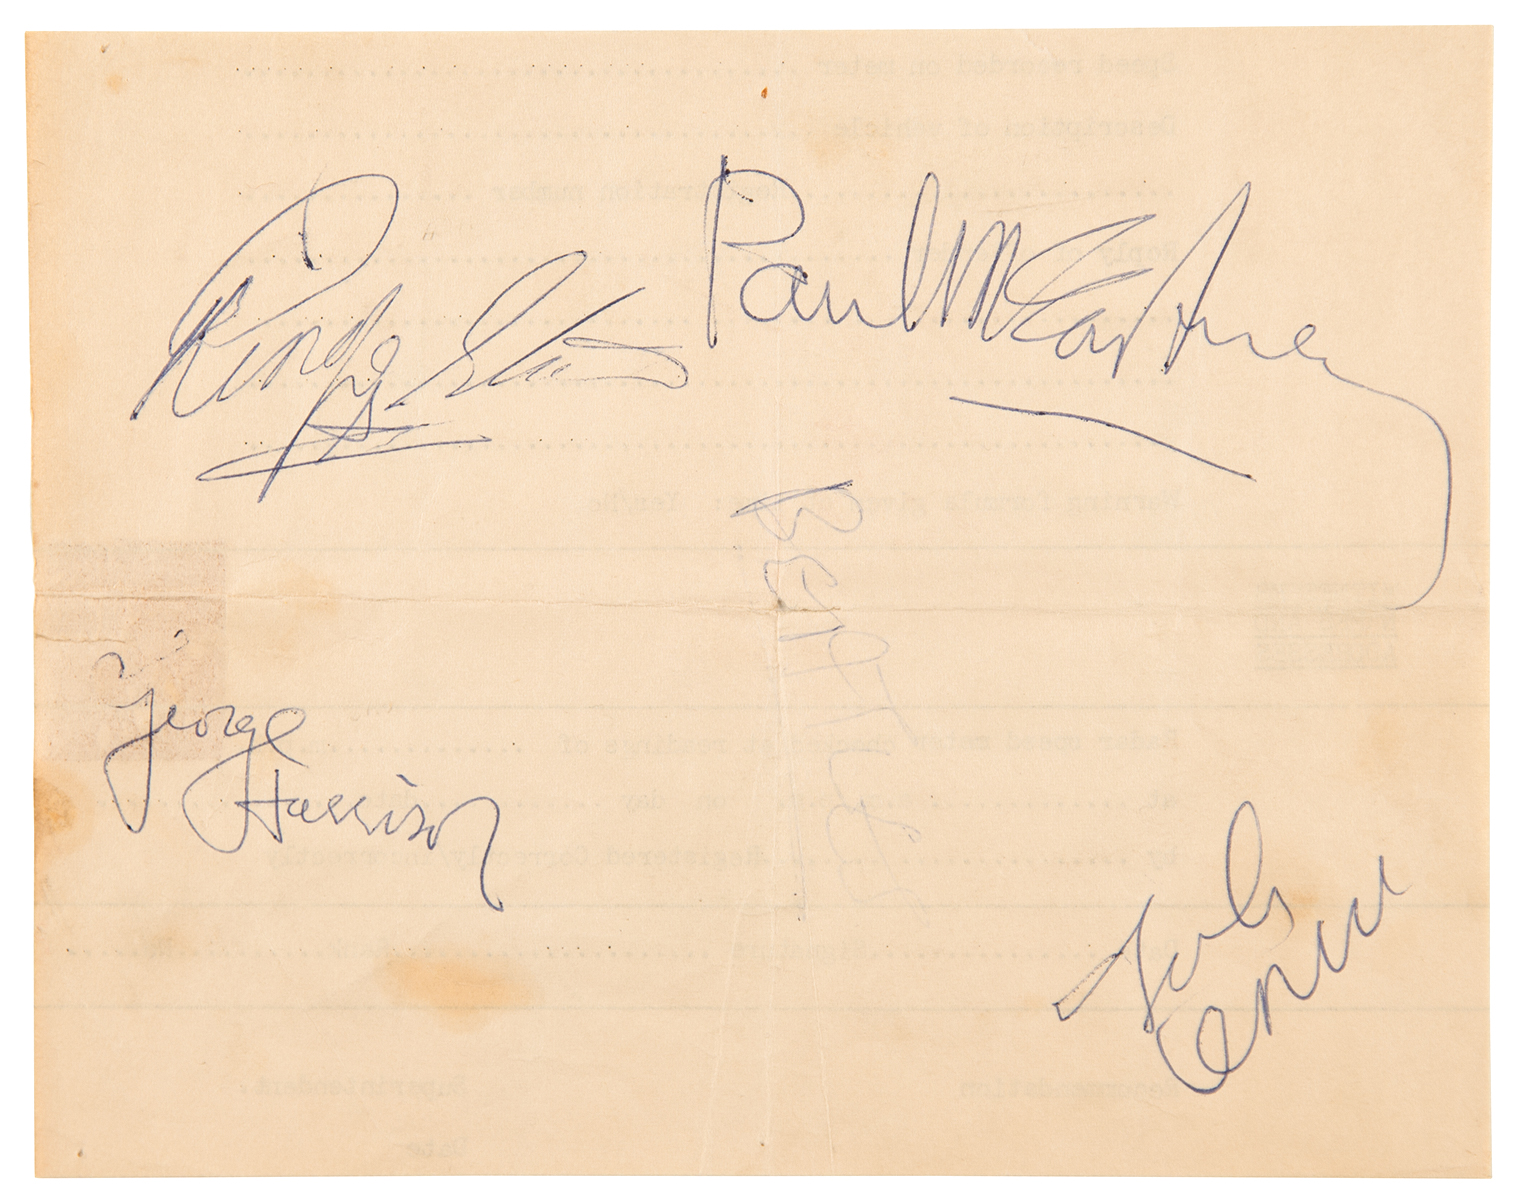 Lot #590 Beatles Signatures - Obtained at City Hall in Newcastle upon Tyne (November 23, 1963) - Image 1